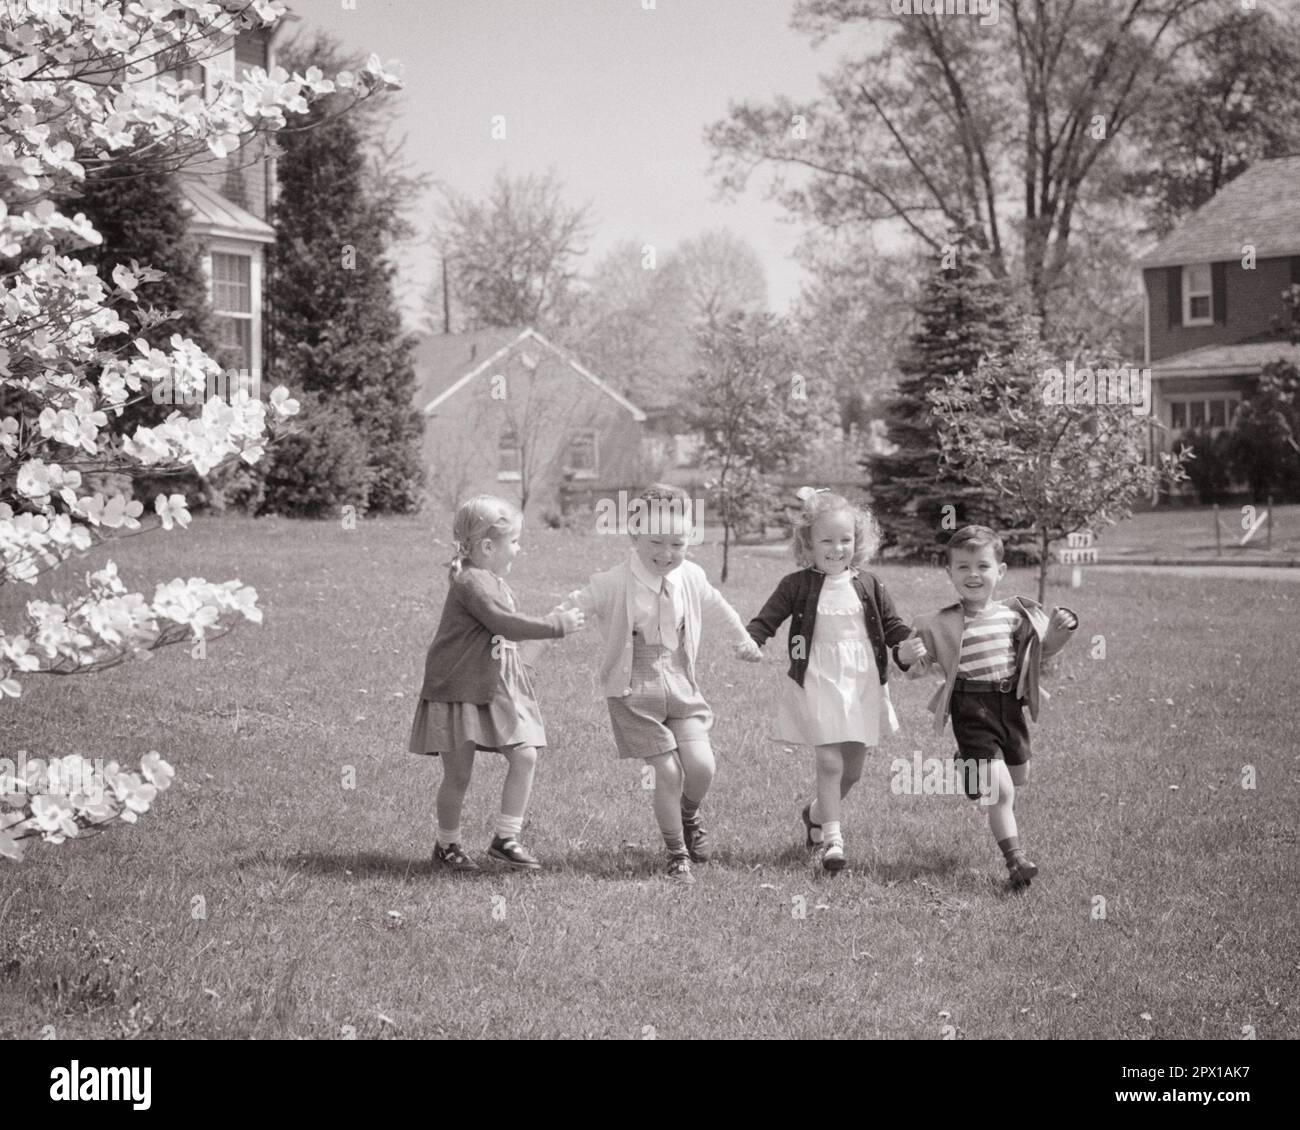 1940s 1950s TWO BOYS TWO GIRLS BROTHERS AND SISTERS RUNNING TOGETHER HOLDING HANDS IN SPRINGTIME ON FRONT LAWN OF SUBURBAN HOME - j1314 HAR001 HARS JUVENILE YARD STYLE LAUGH TEAMWORK PLEASED JOY LIFESTYLE SATISFACTION FEMALES EASTER BROTHERS HEALTHINESS HOME LIFE COPY SPACE FRIENDSHIP FULL-LENGTH MALES SIBLINGS SISTERS B&W NEIGHBORS FREEDOM HAPPINESS NEIGHBORHOOD CHEERFUL ADVENTURE LEISURE BLOSSOM AND EXCITEMENT RECREATION SIBLING SMILES SWEATERS CONNECTION JOYFUL STYLISH SUPPORT FANCY DRESS COOPERATION GROWTH JUVENILES SPRING SEASON SPRINGTIME TOGETHERNESS BLACK AND WHITE CAUCASIAN ETHNICITY Stock Photo